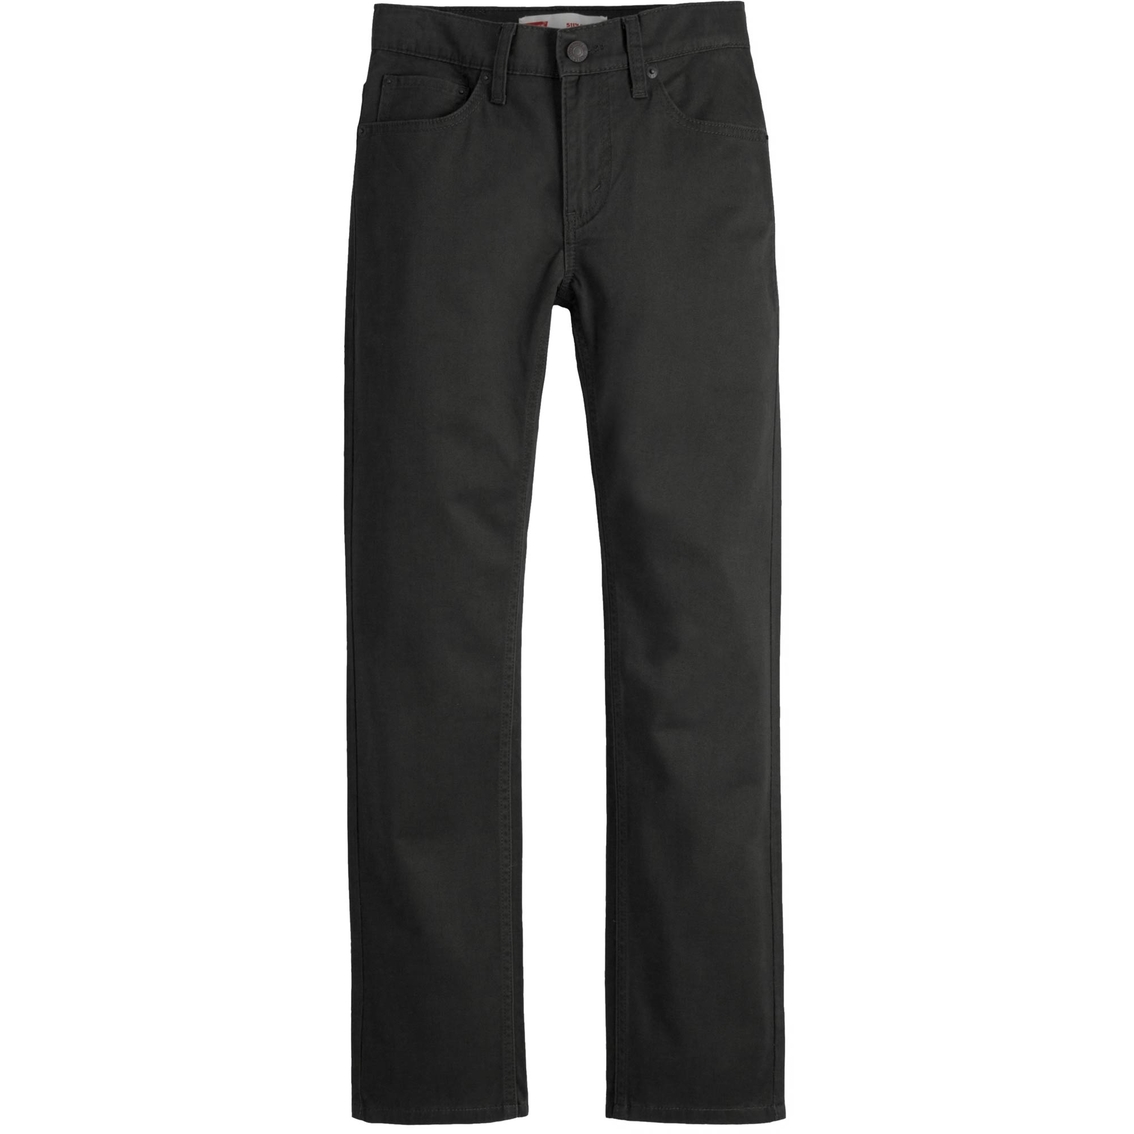 Levi's Boys 511 Sueded Pants | Boys 8-20 | Clothing & Accessories ...